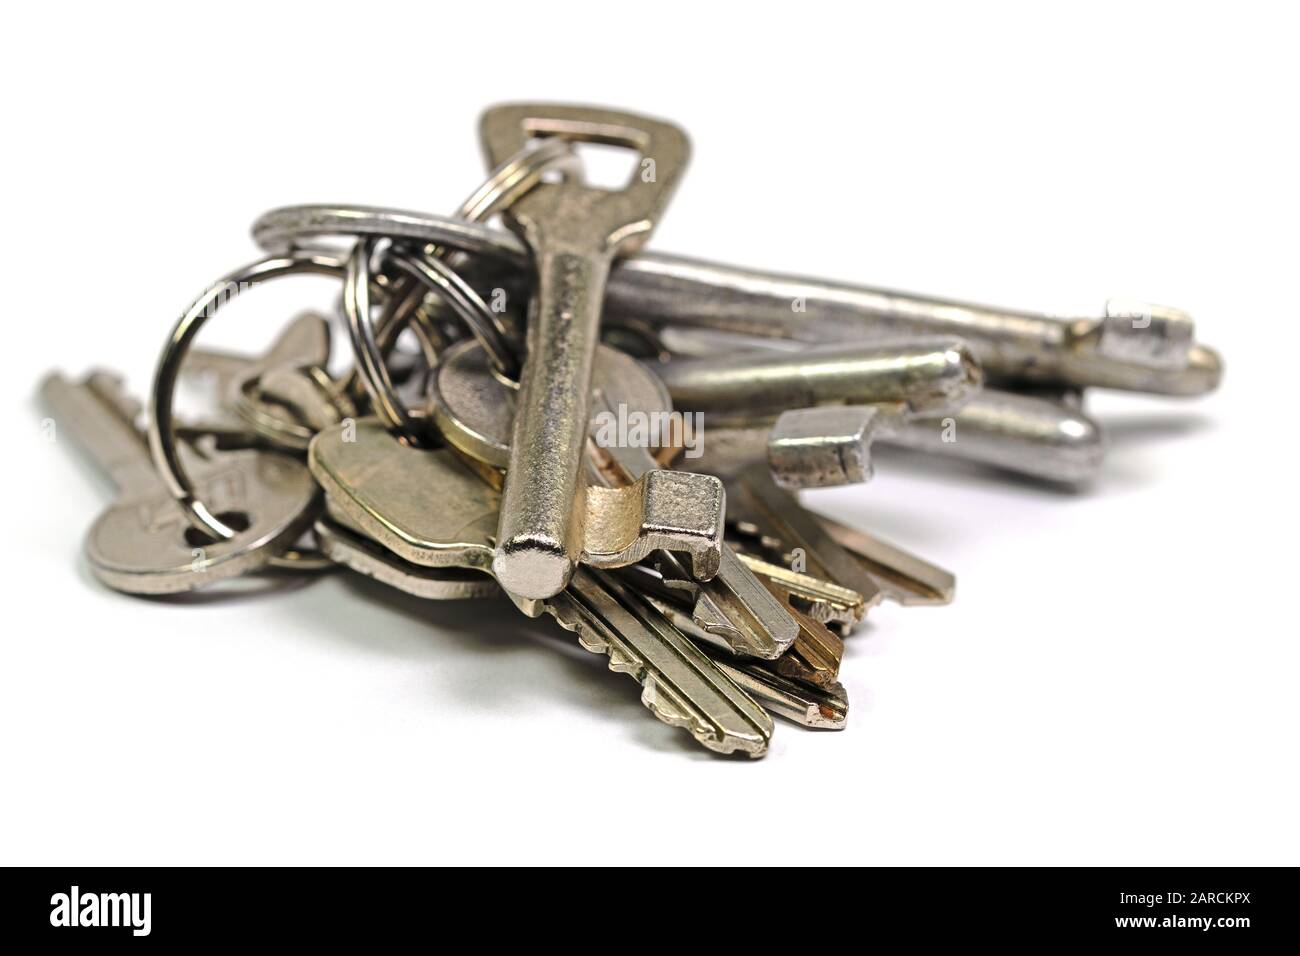 Bunch of keys isolated against white background Stock Photo